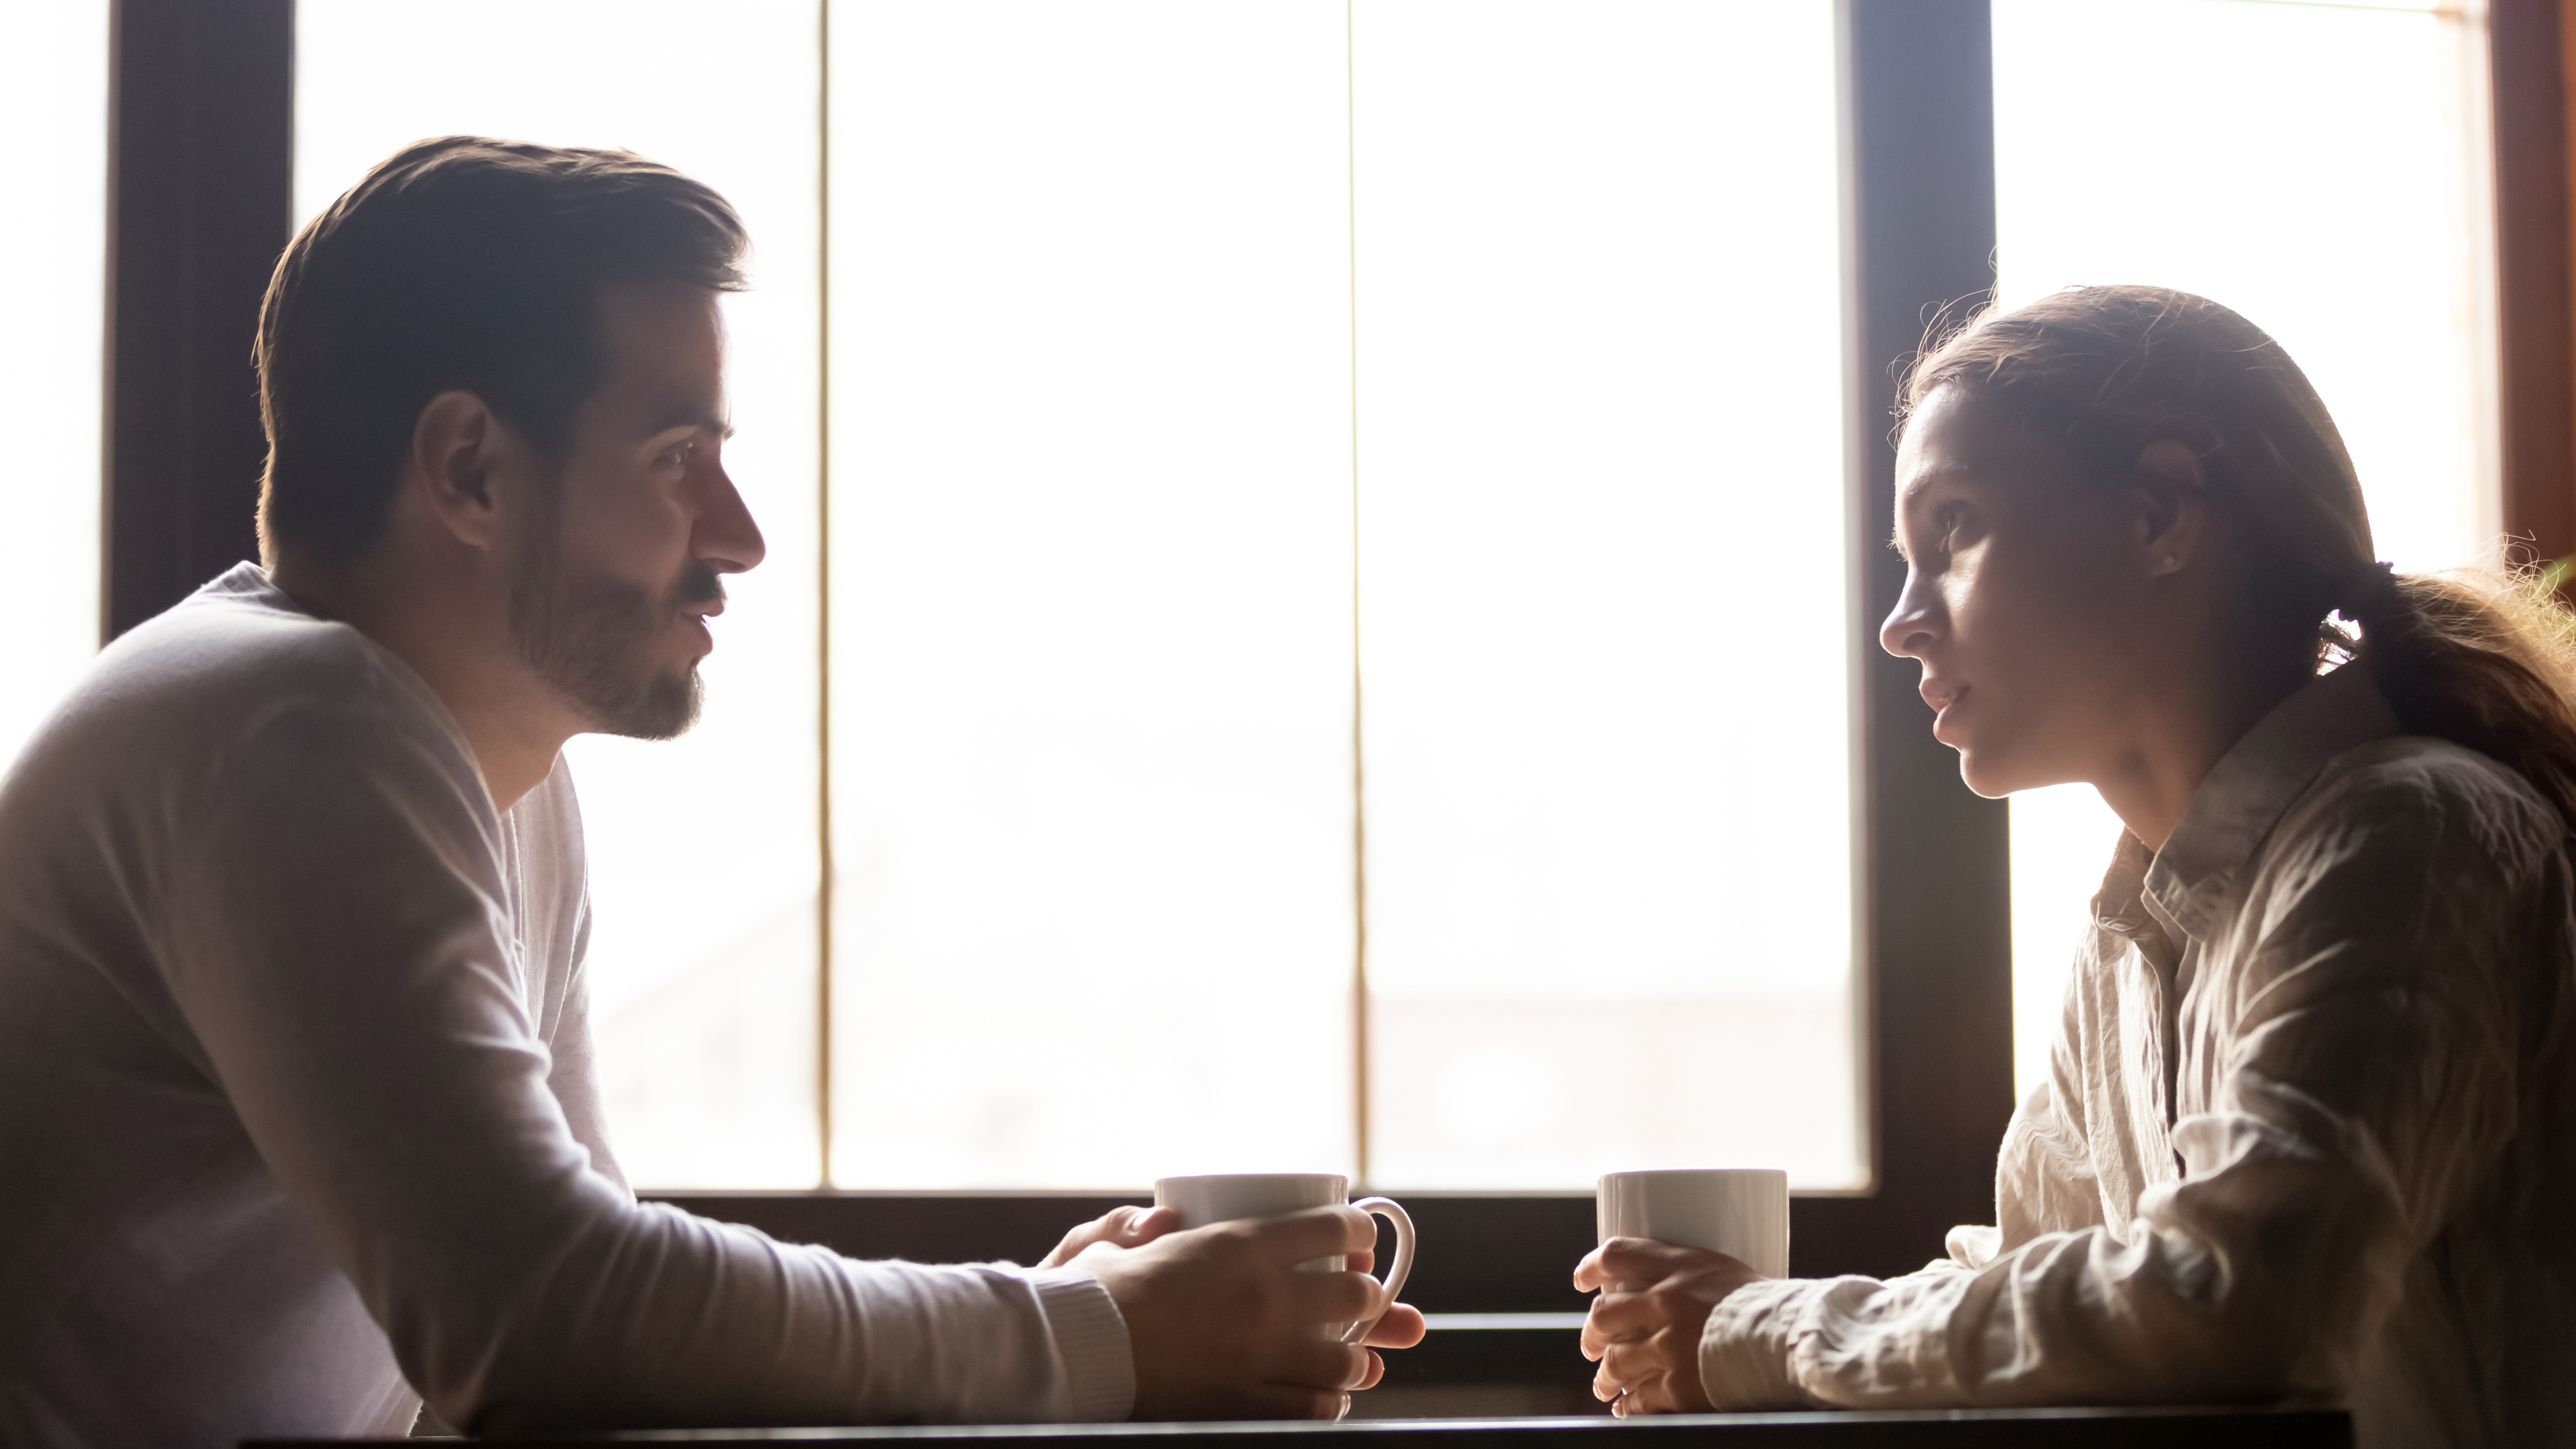 A man and woman sitting across each other, each holding a cup | Source: Shutterstock